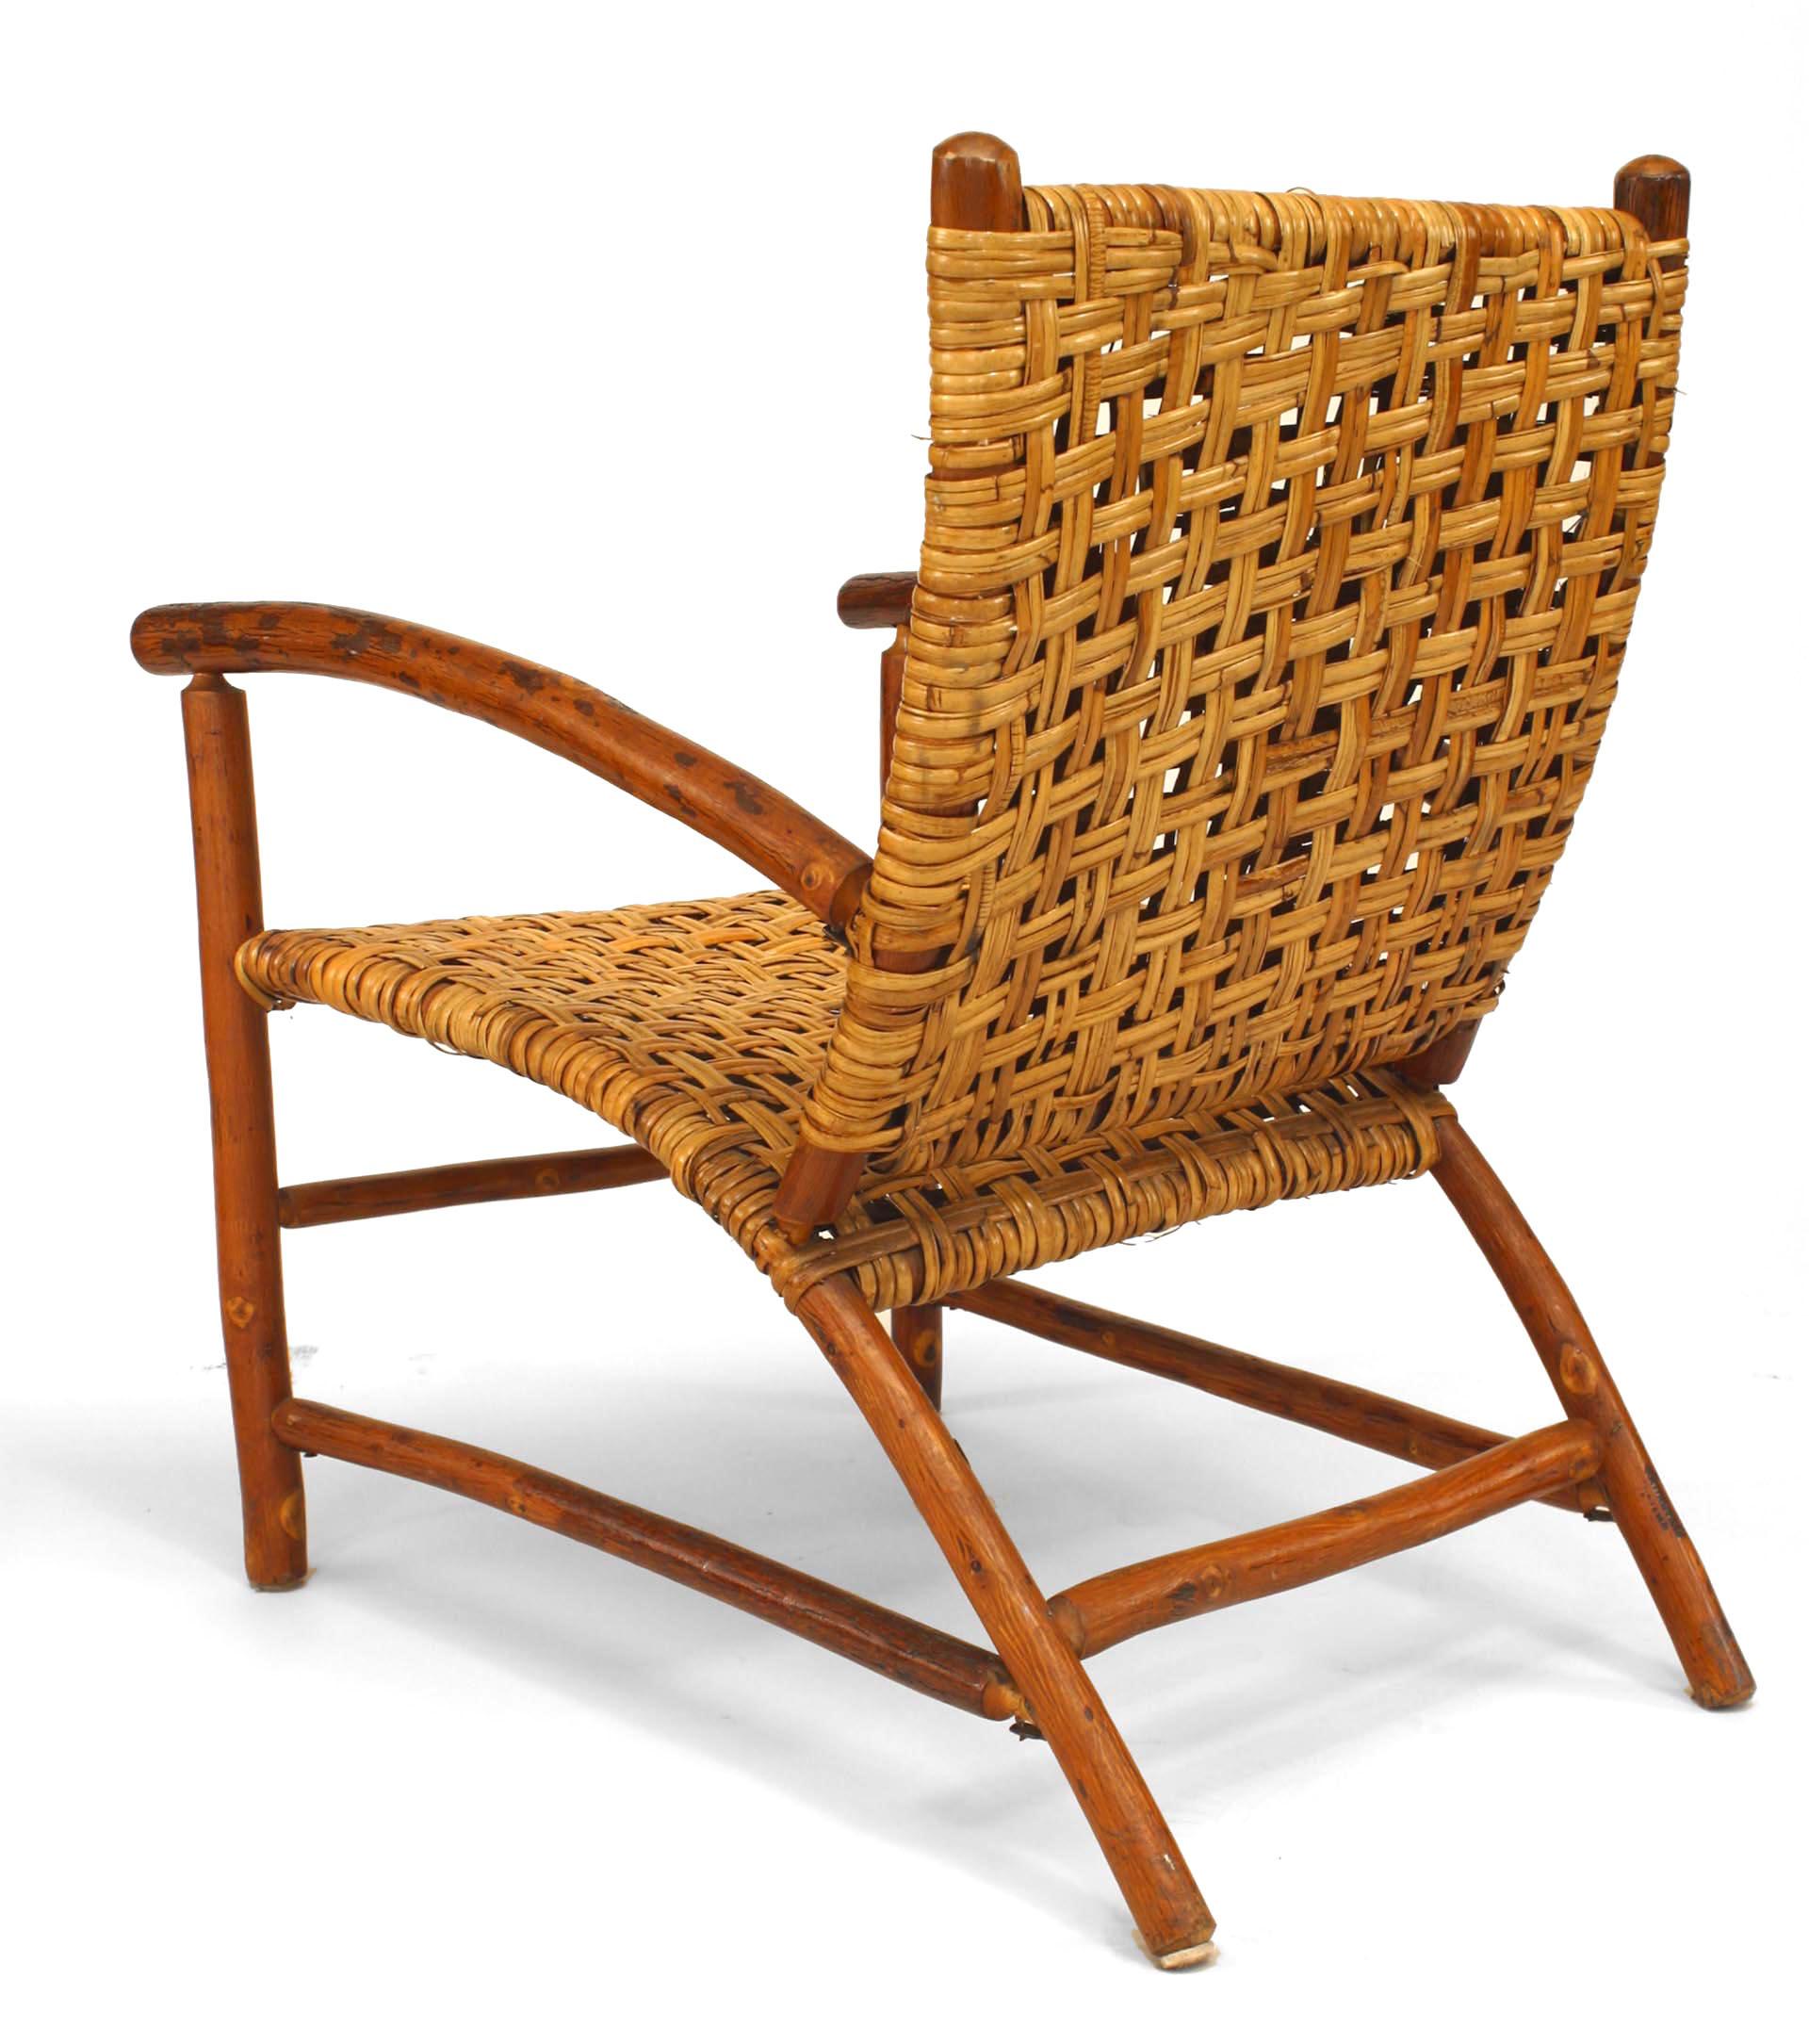 Rustic Old Hickory Woven Arm Chair